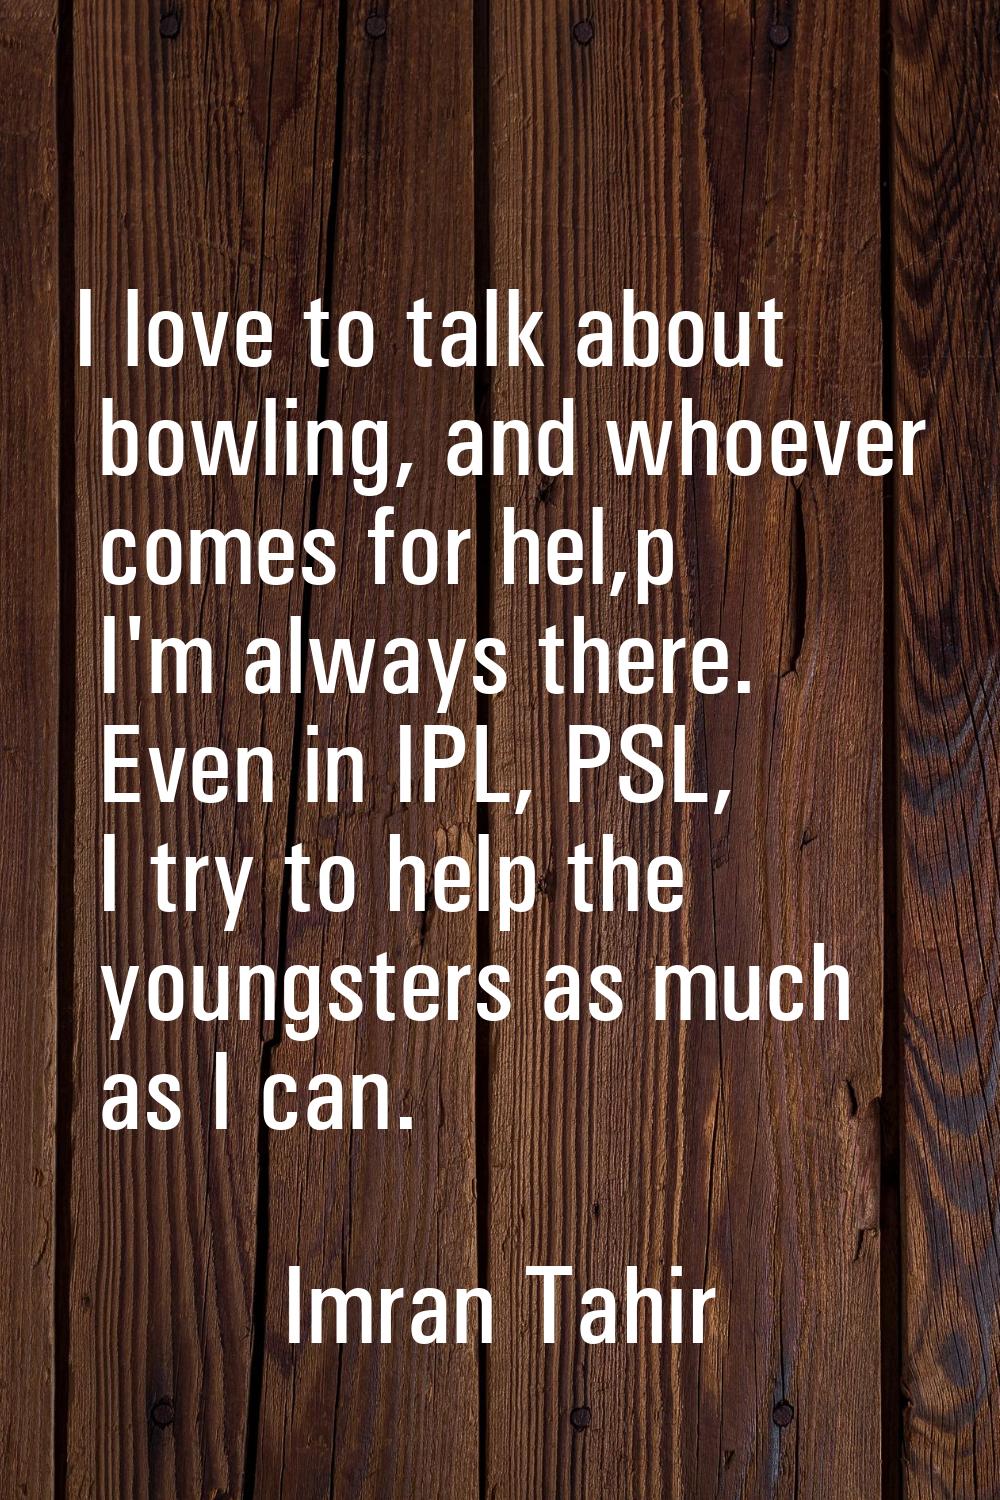 I love to talk about bowling, and whoever comes for hel,p I'm always there. Even in IPL, PSL, I try